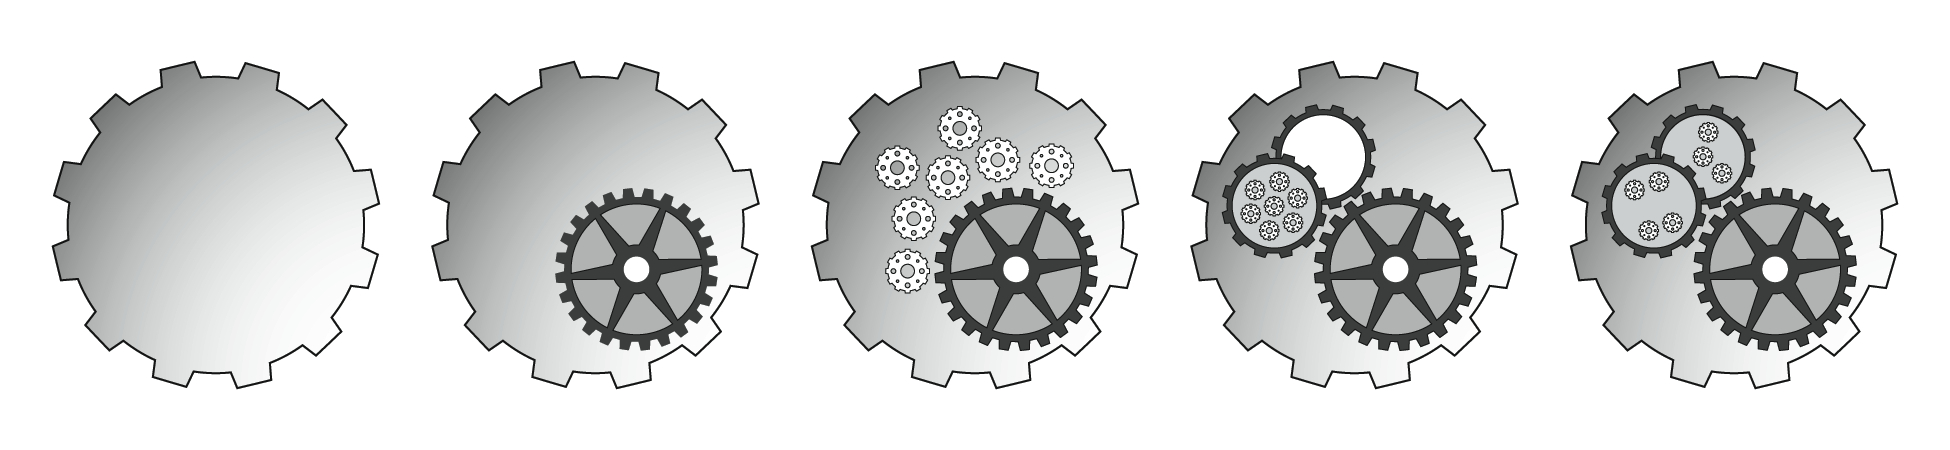 Five sample clock droplets with varying arrangements of gears.